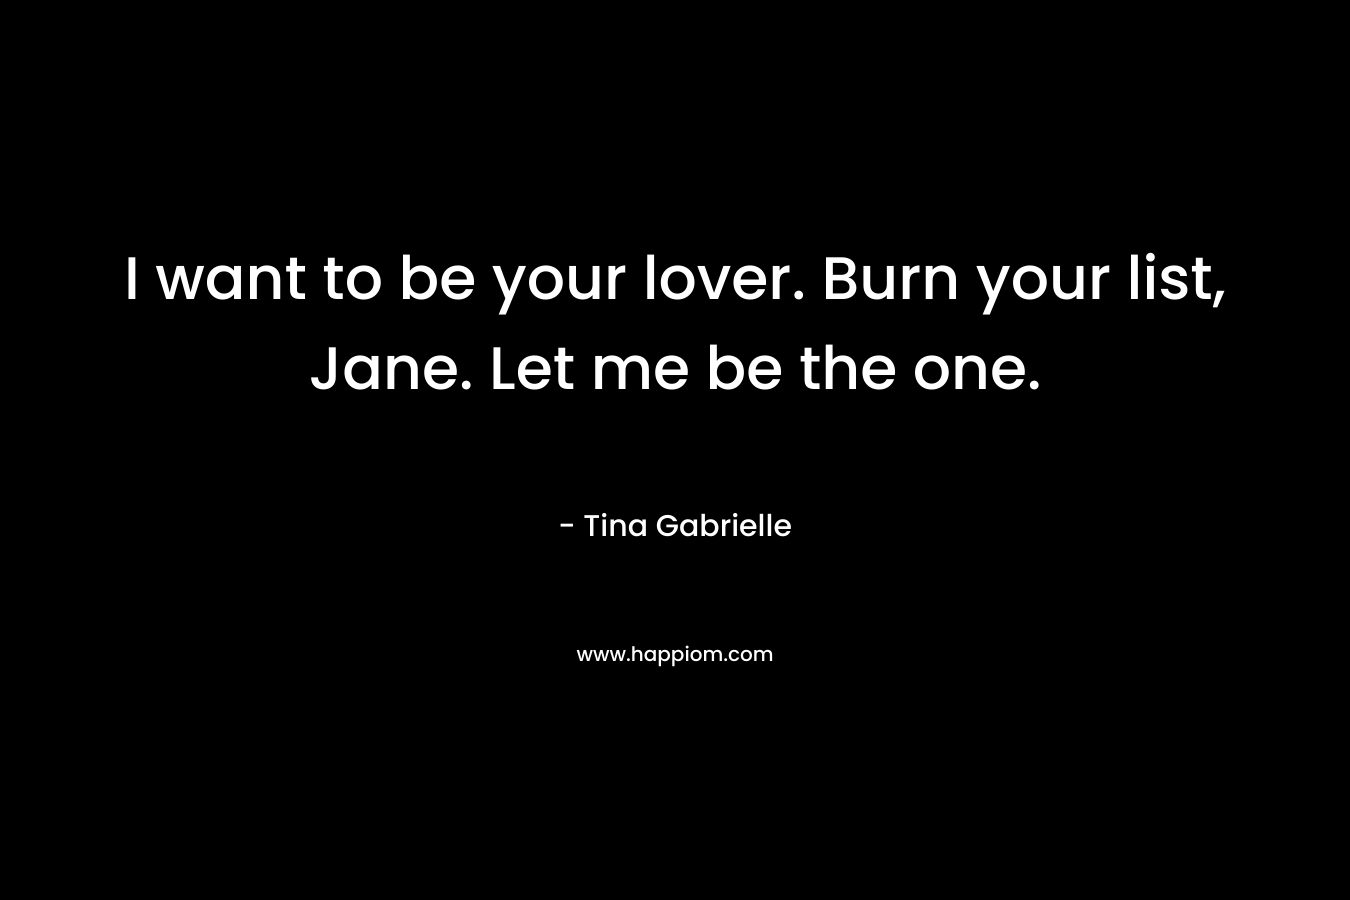 I want to be your lover. Burn your list, Jane. Let me be the one. – Tina Gabrielle